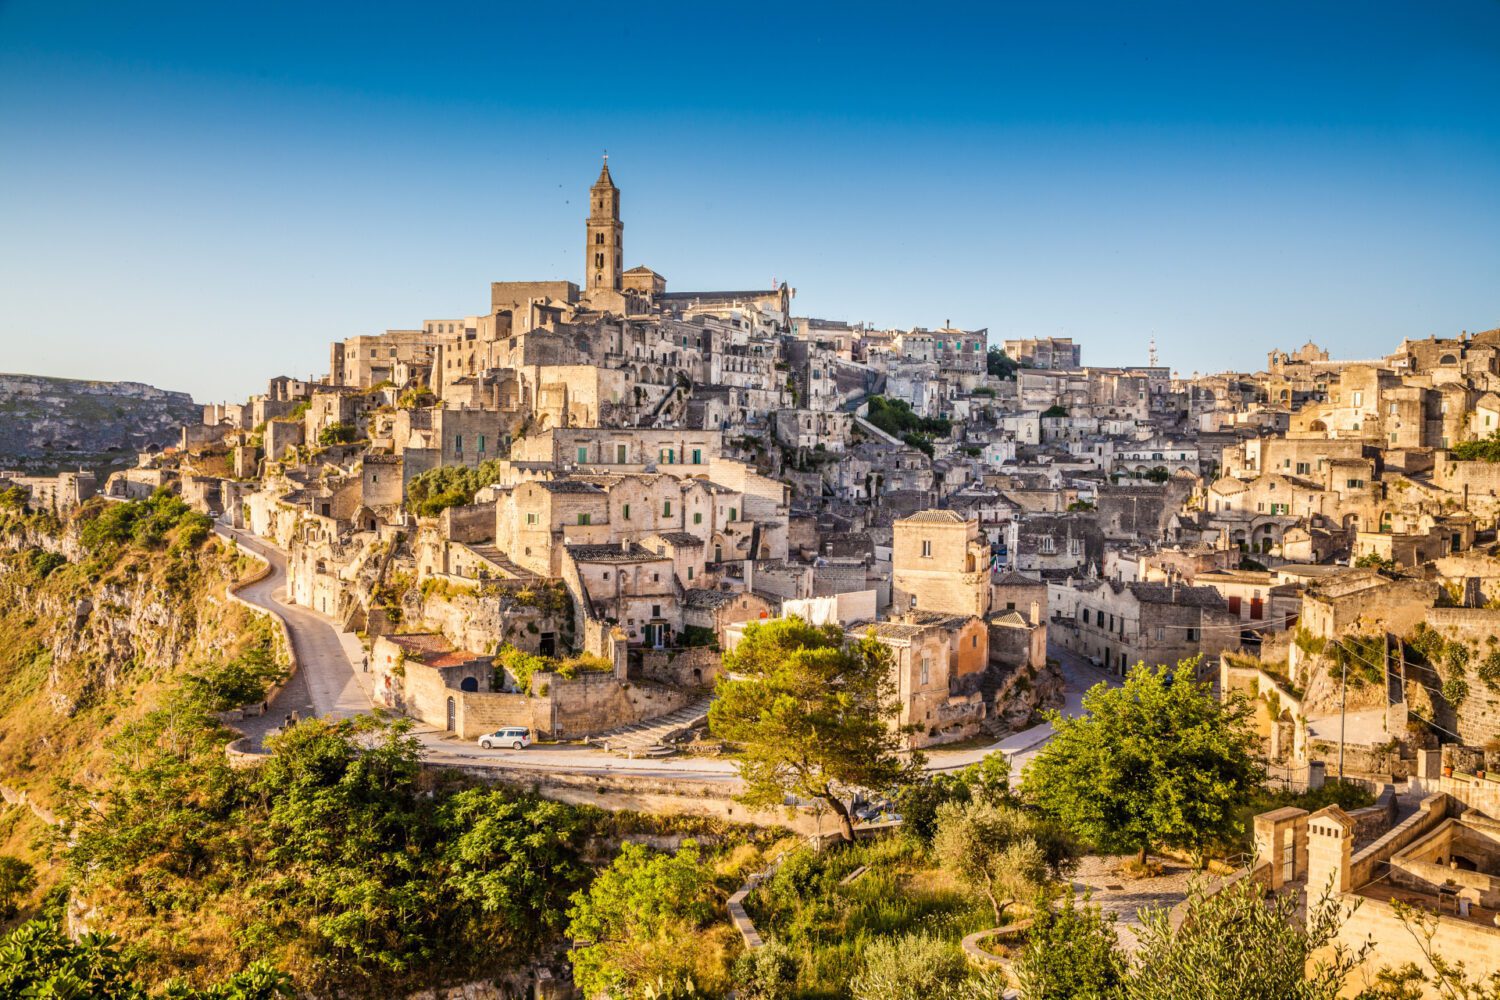 A view of Matera, the city of Sassi, Italy